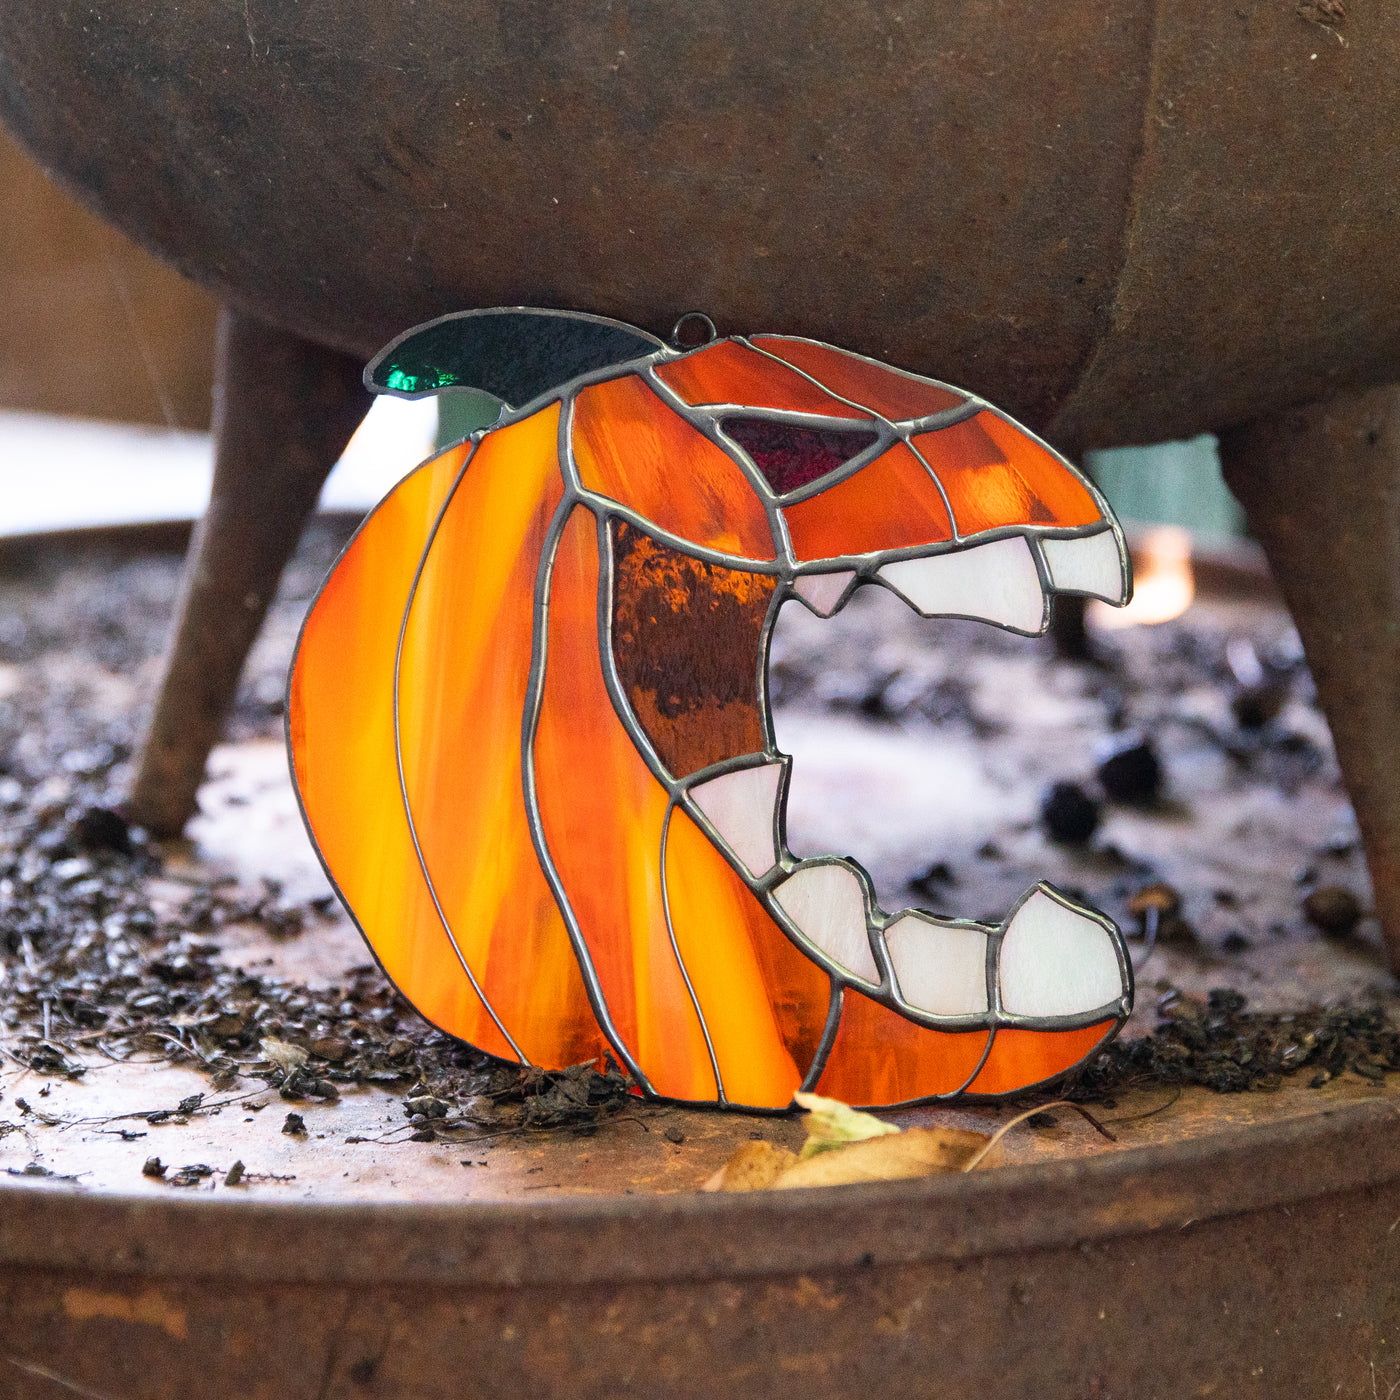 Creepy stained glass pumpkin with the fangs suncatcher